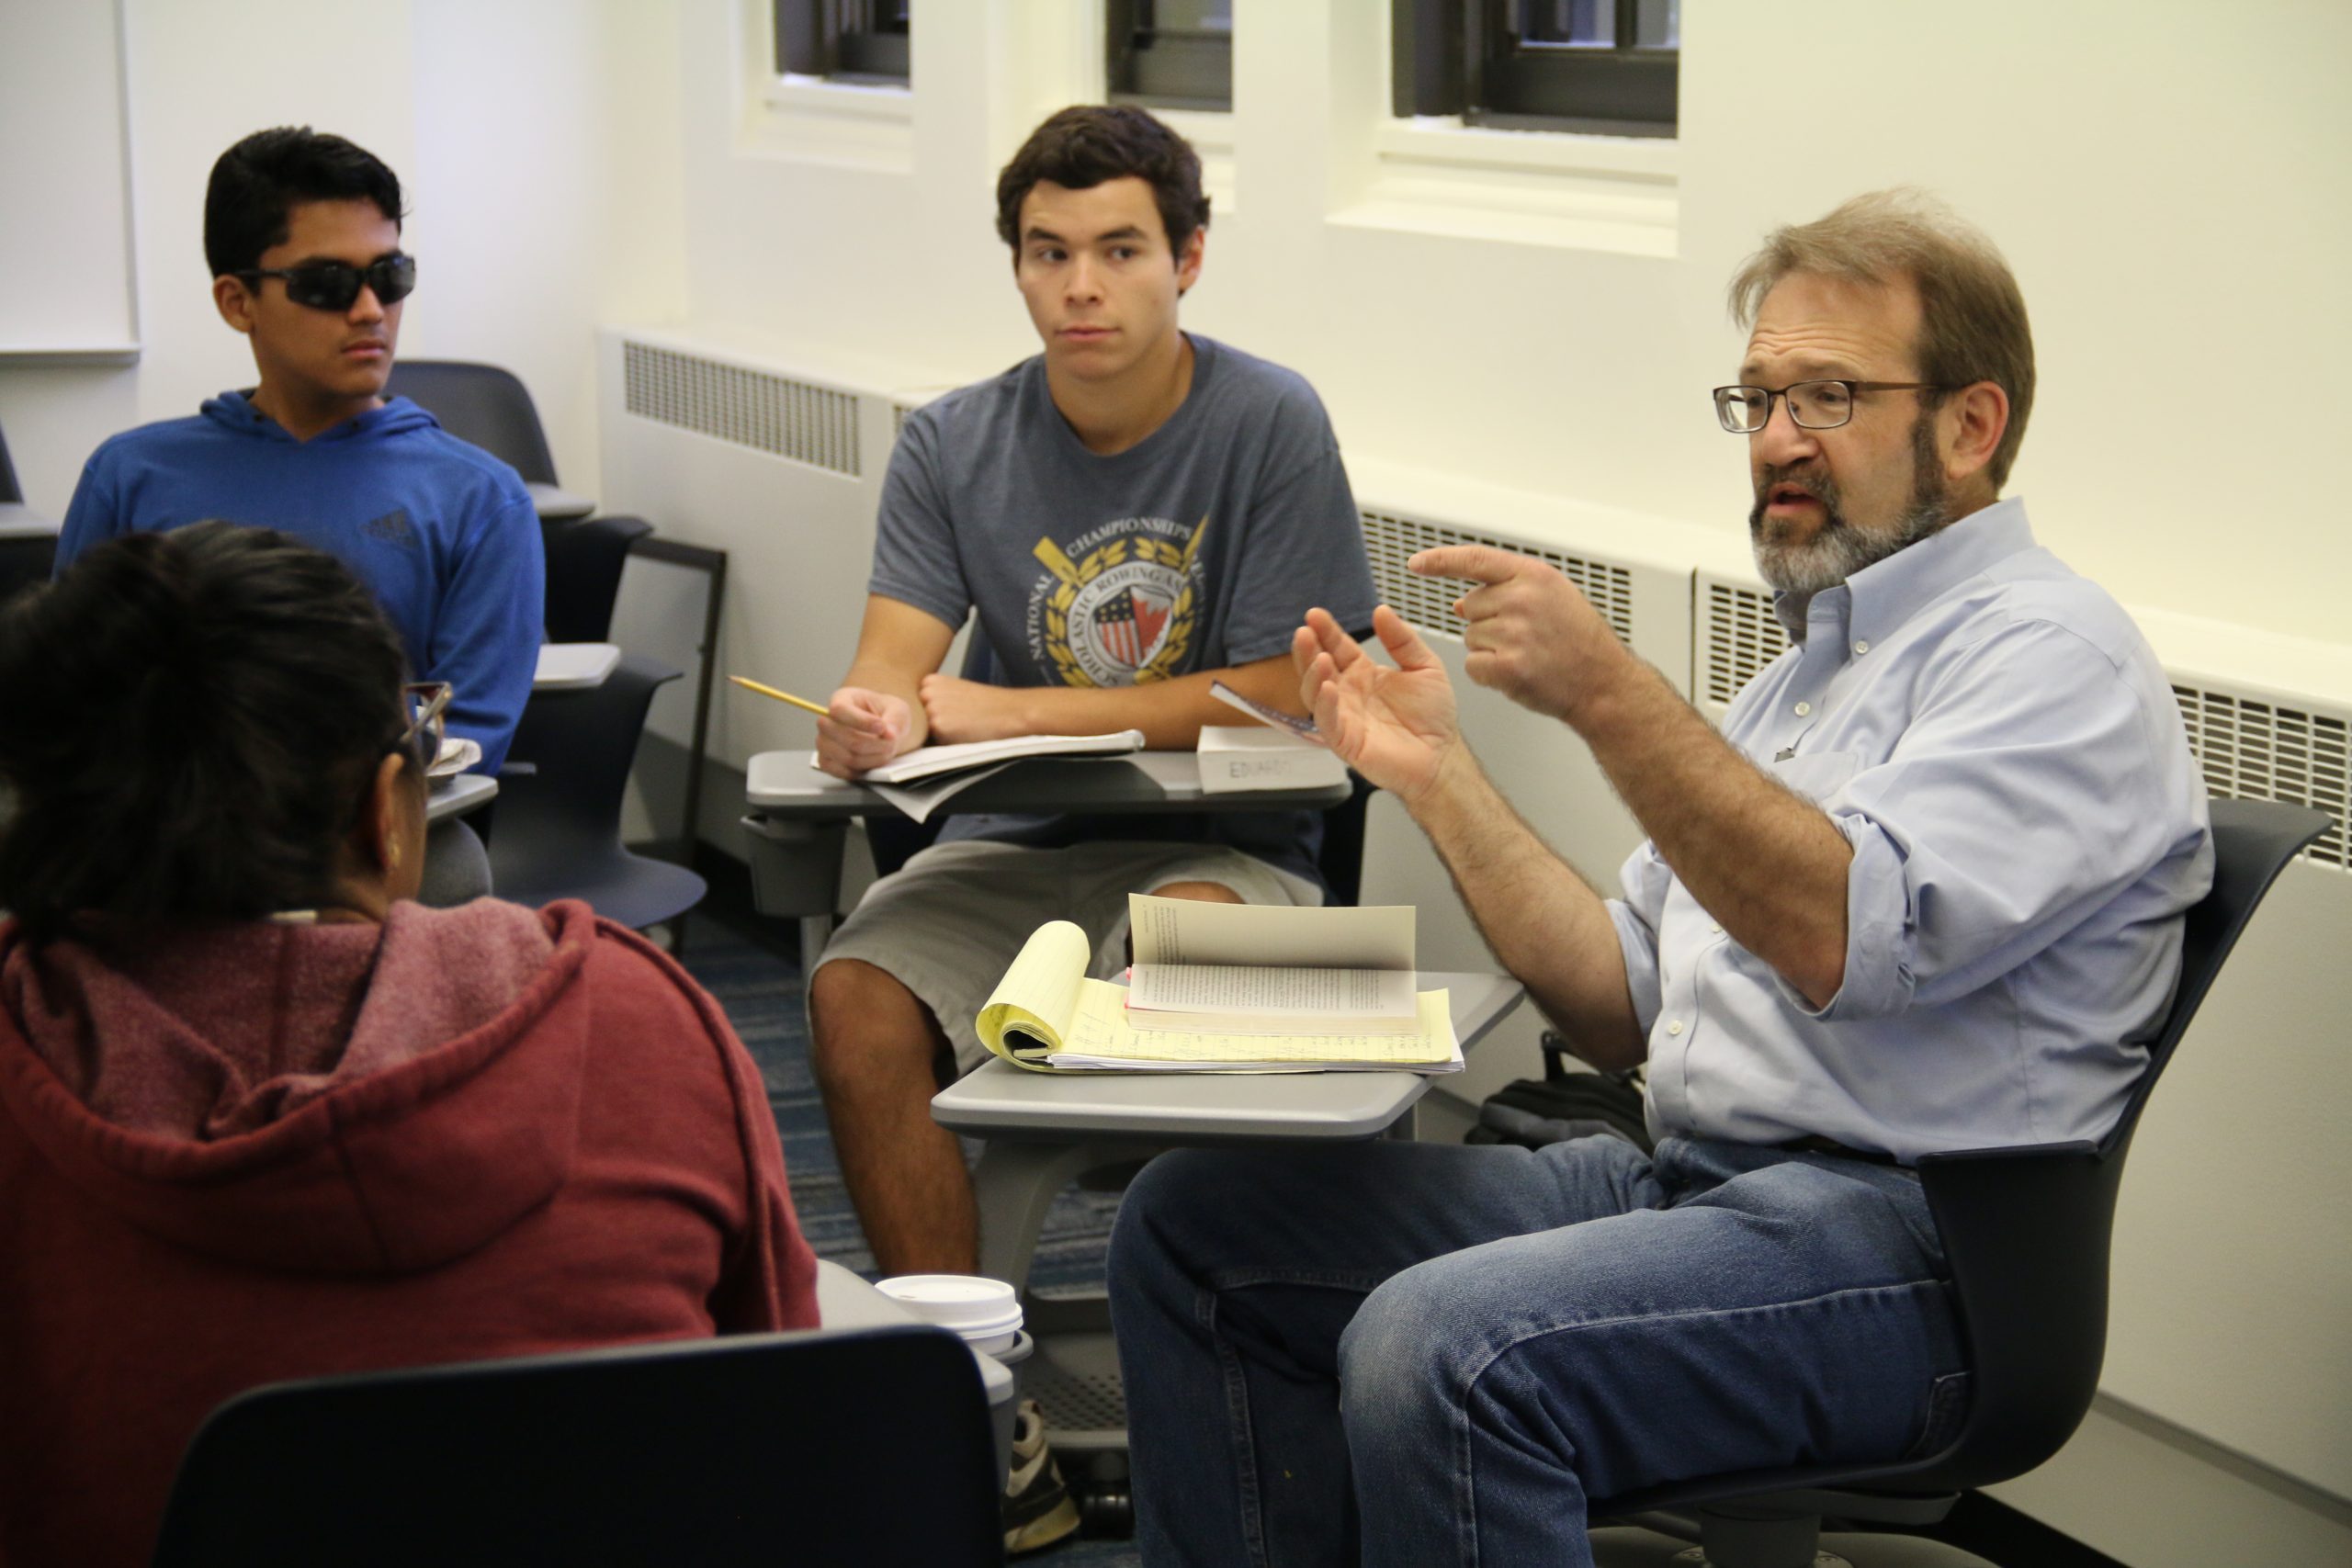 Professor Bill North and three students sit at desks in a circle while the students listen to Bill explaining some text